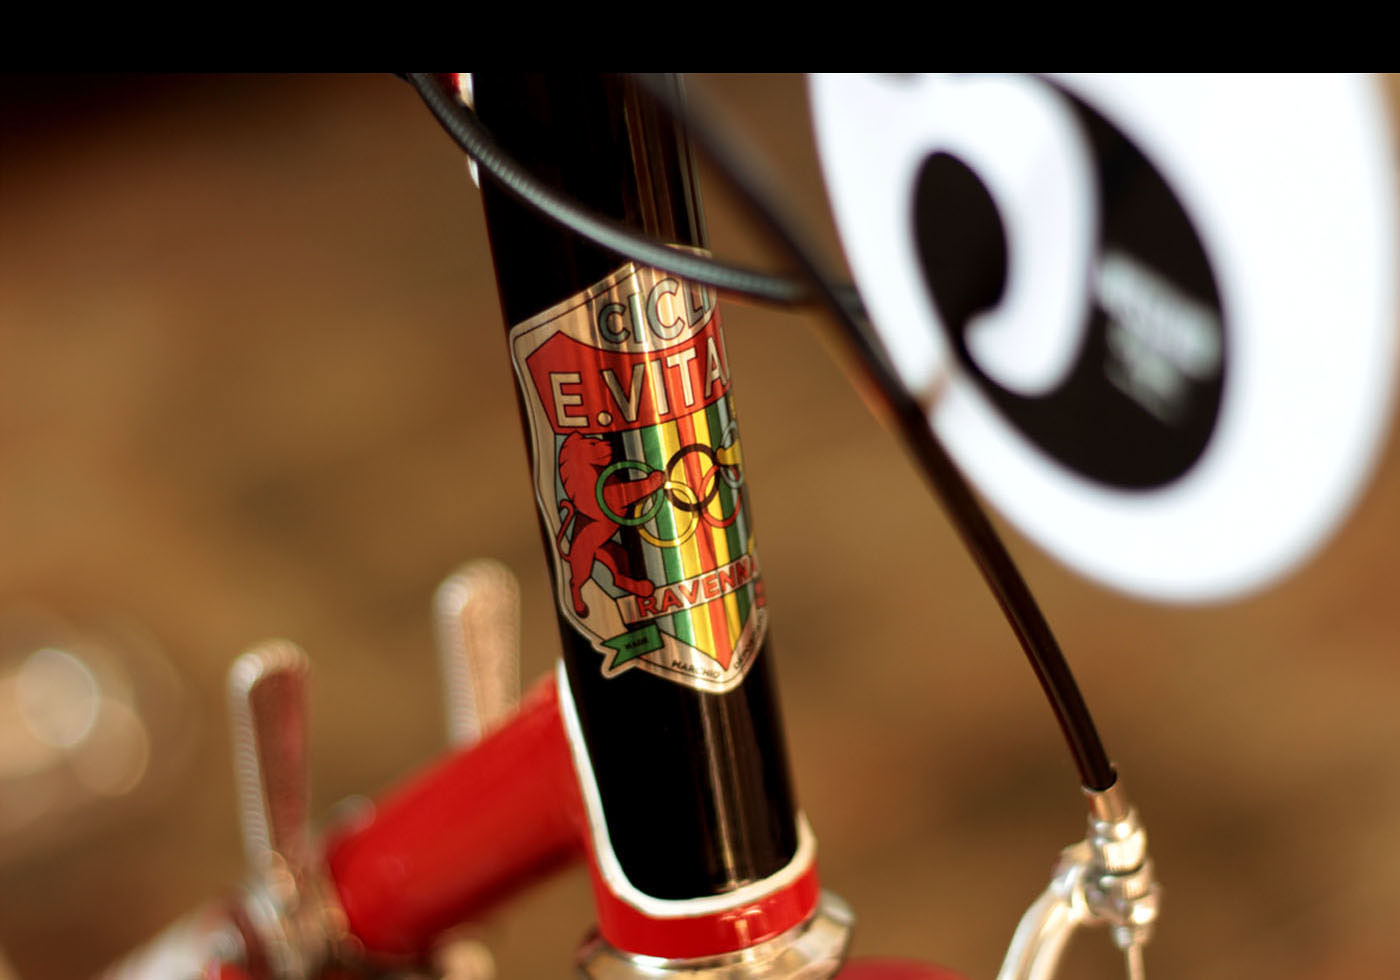 #scattofisso #vintage  #vintagebike #campagnolo #cycle #brand #ciclivitali #cycling #handmade in italy #brooks england